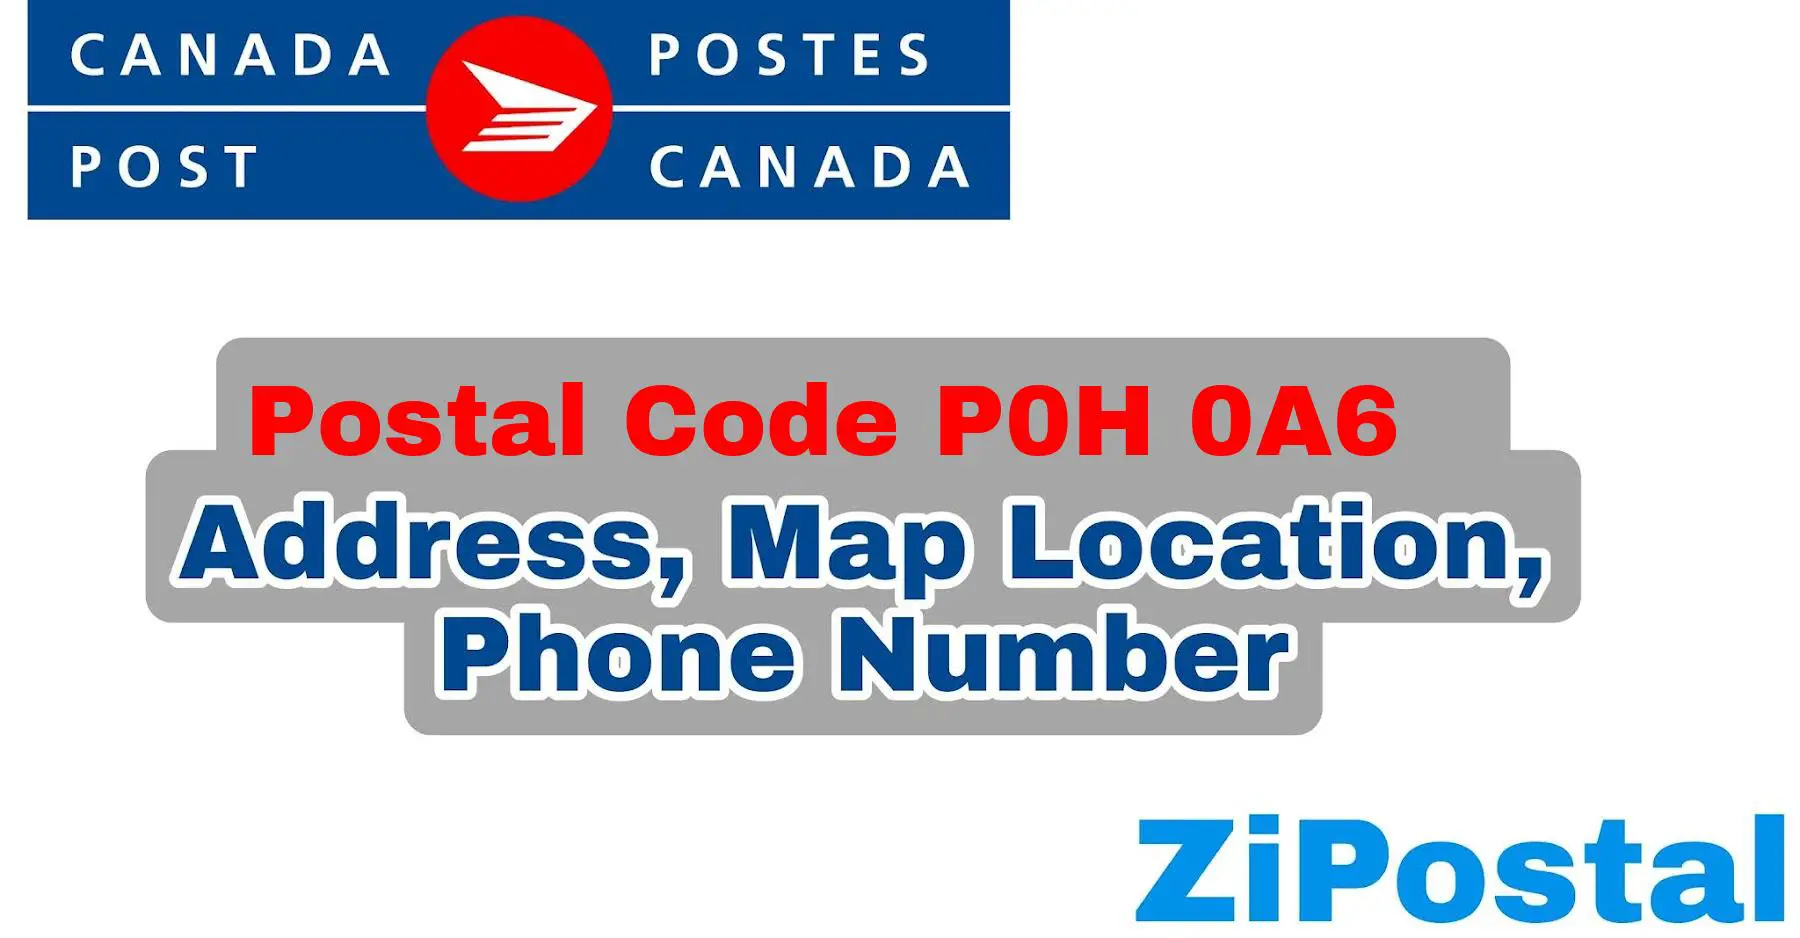 Postal Code P0H 0A6 Address Map Location and Phone Number